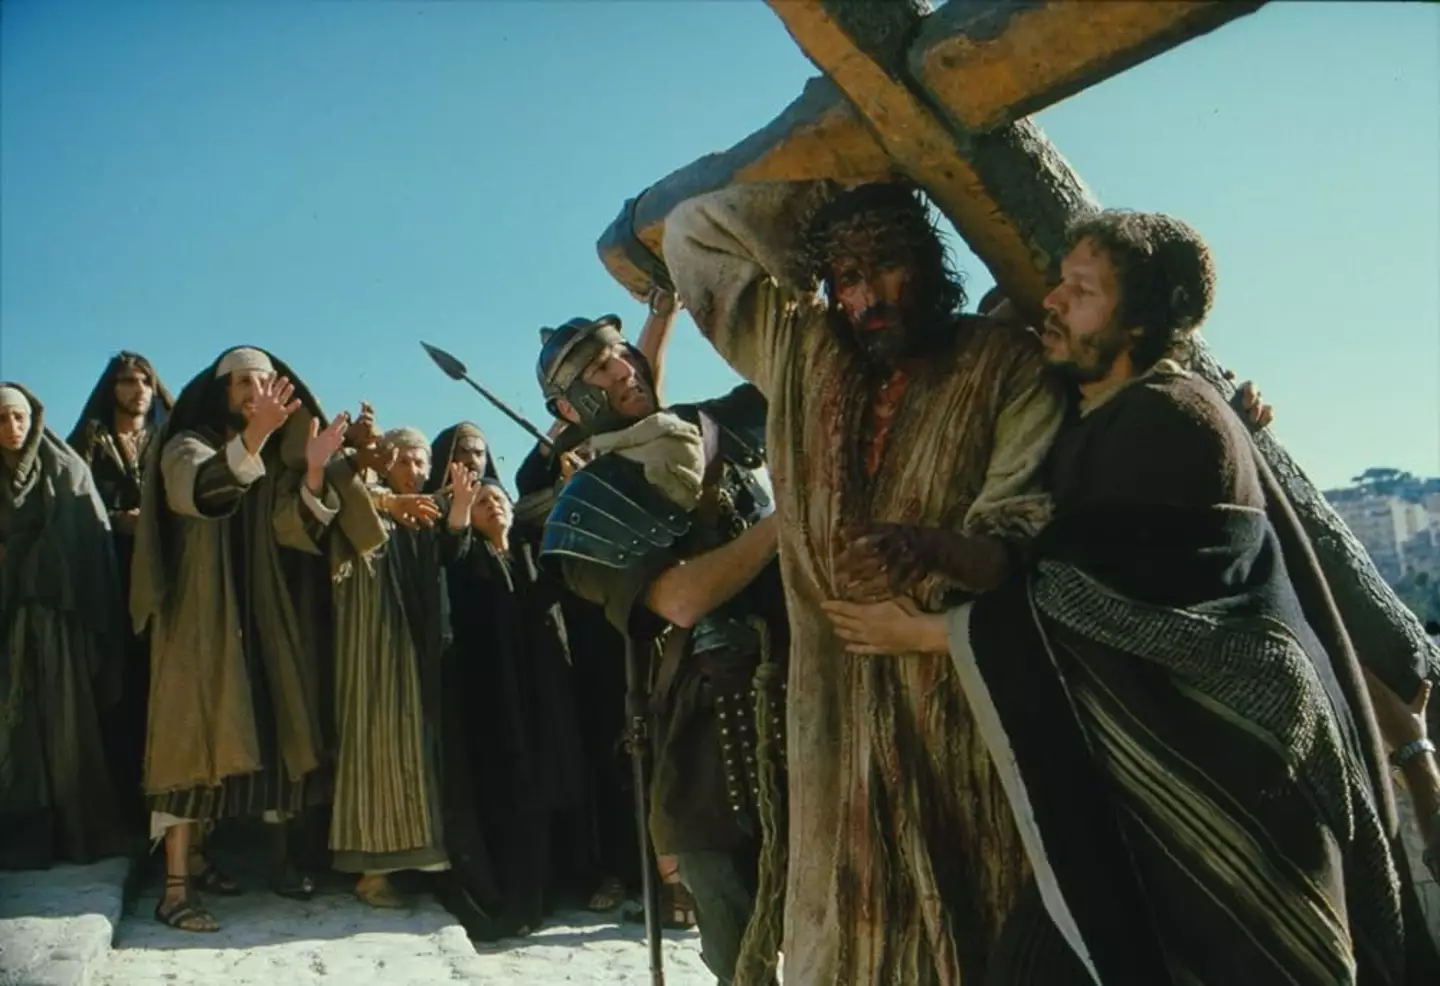 Jim Caviezel playing Jesus Christ as he walks with the cross in The Passion of the Christ. (Twentieth Century Fox)